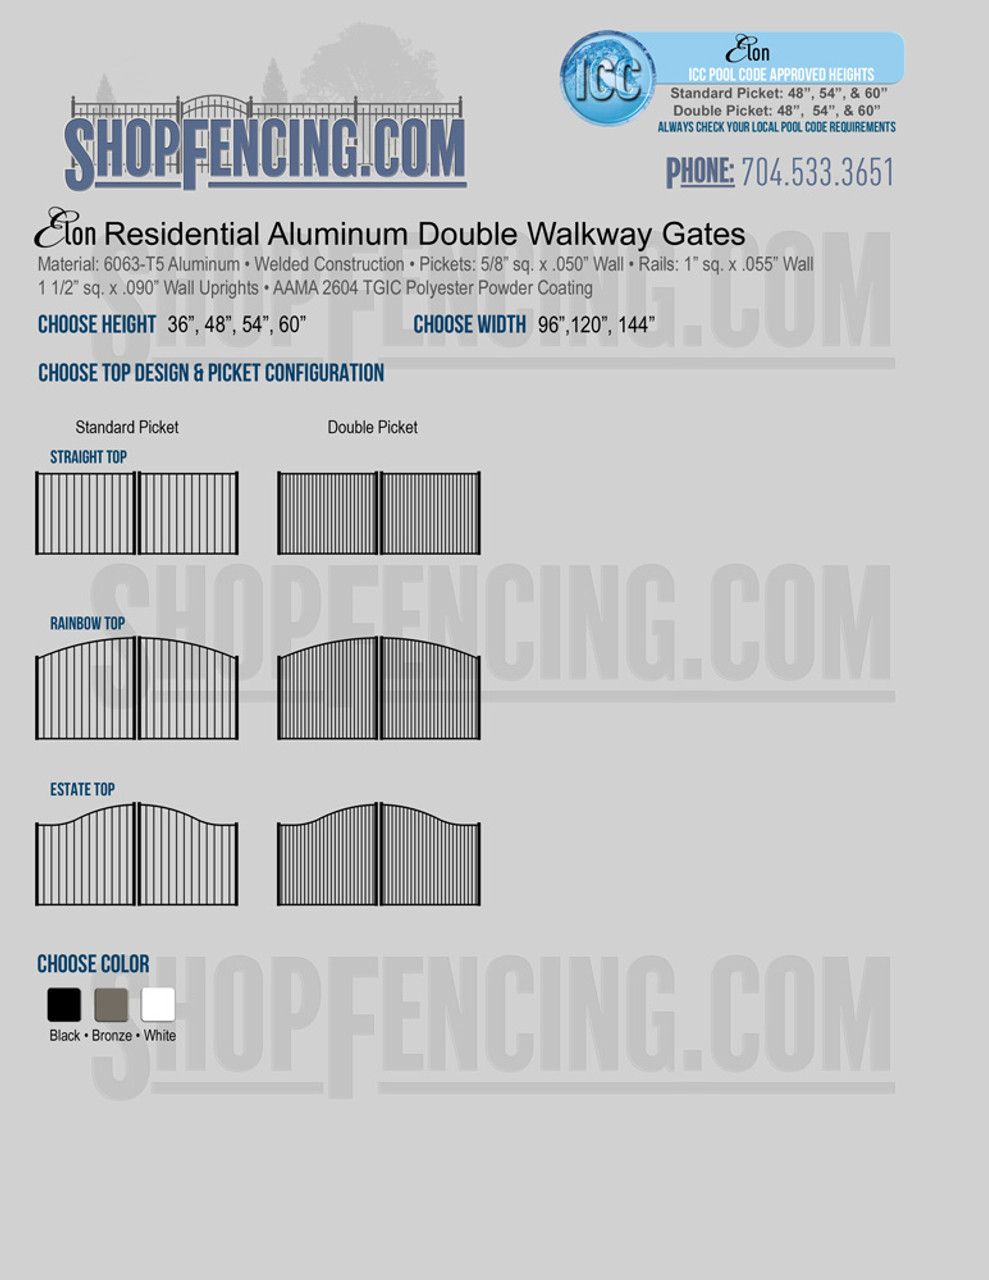 Residential Elon Aluminum Double Walkway Gates From ShopFencing.com